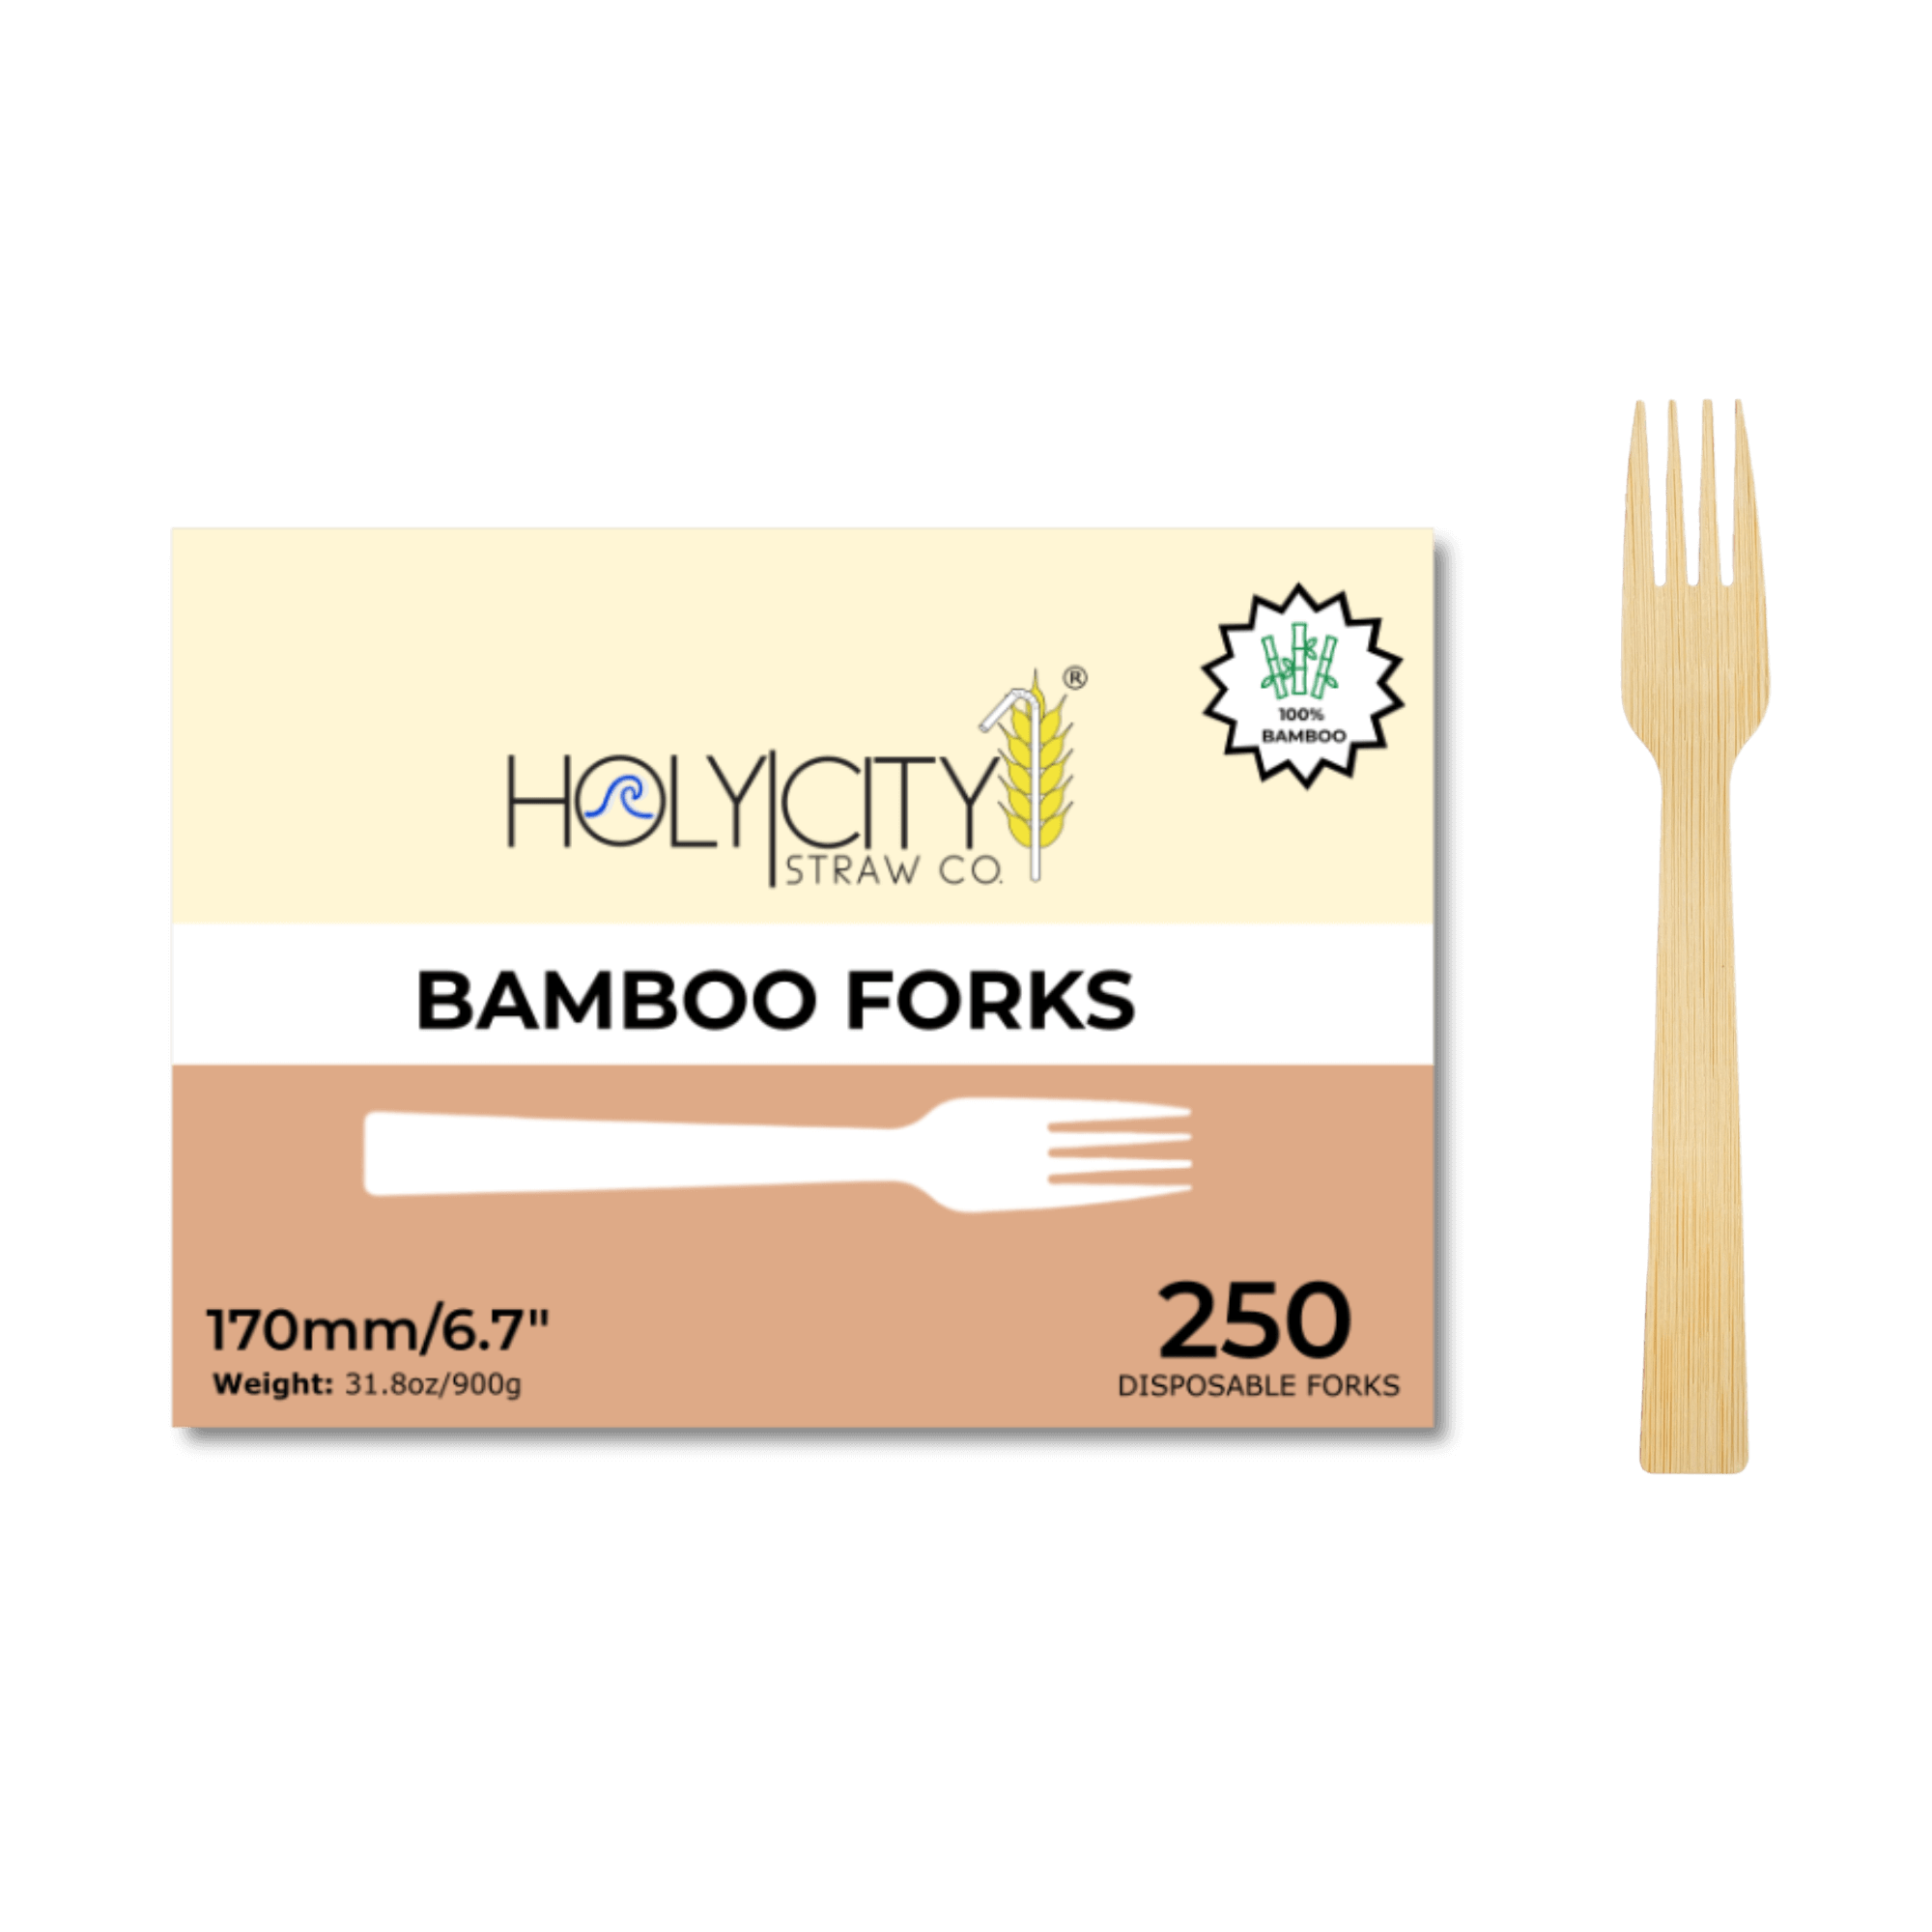 Holy City Straw Co. 250 count box of unwrapped dessert bamboo forks